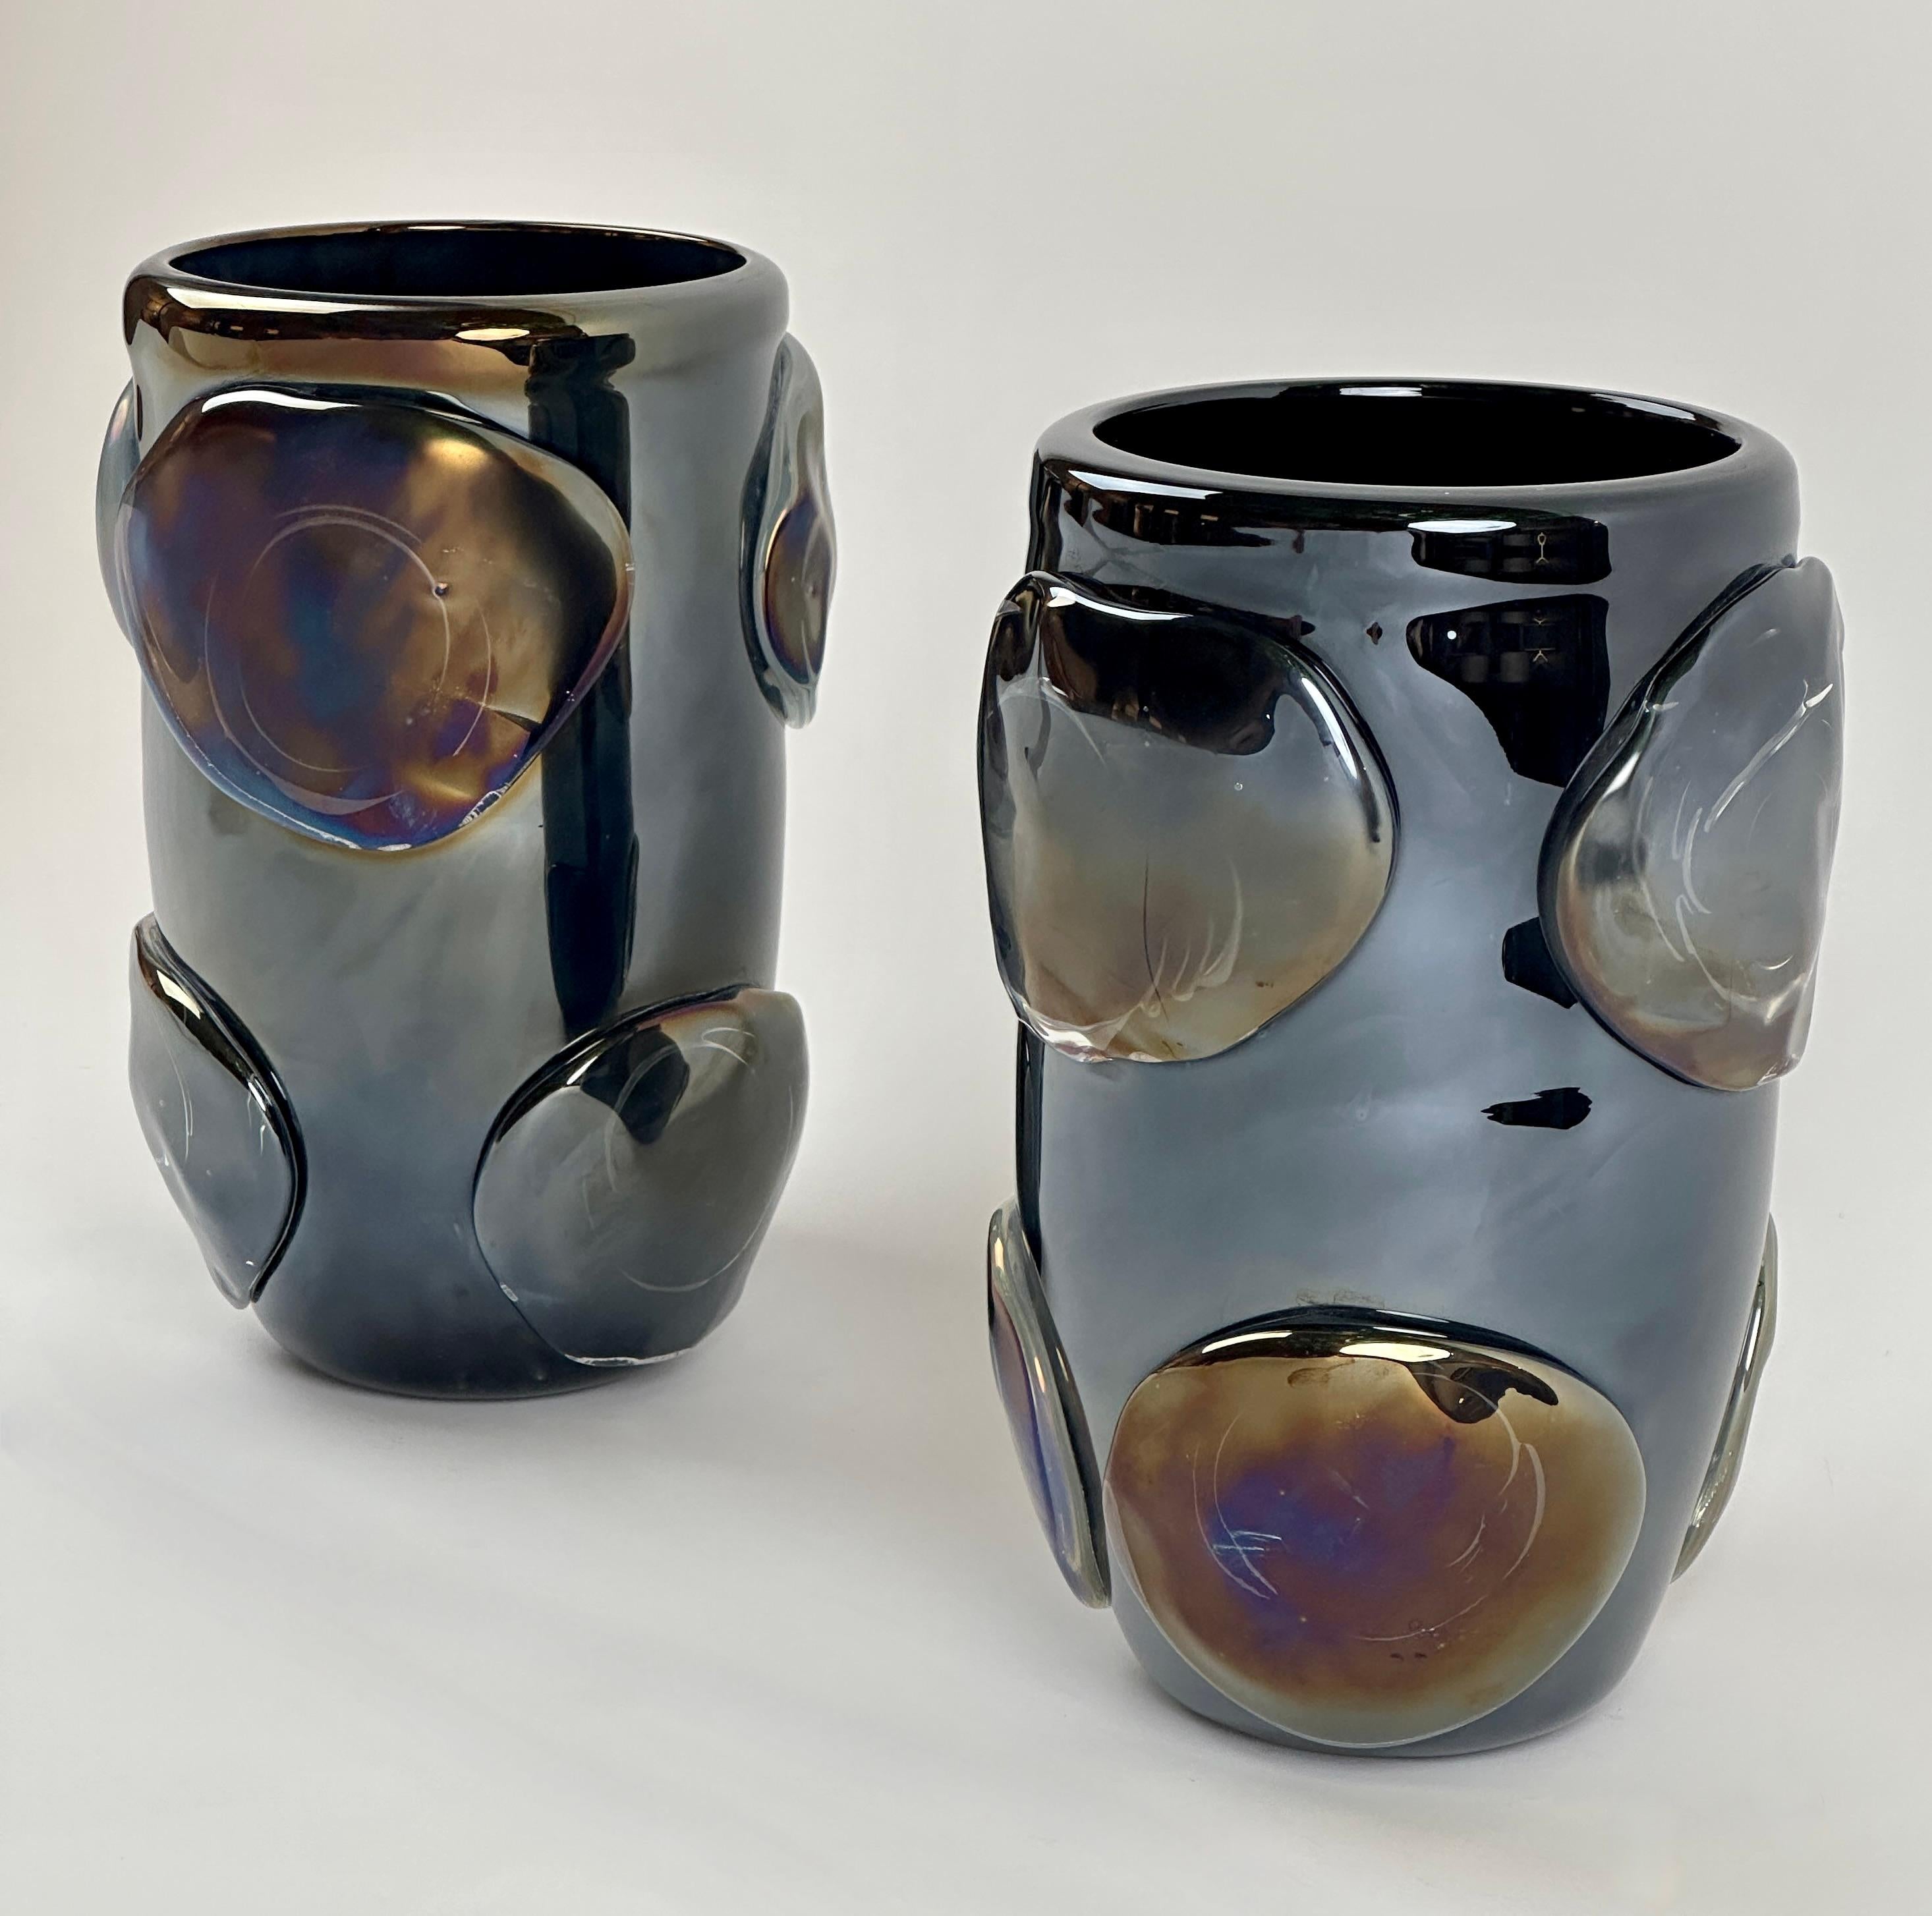 Italian Pair of Vintage Black Iridescent Murano Art Glass Vases by Costantini For Sale